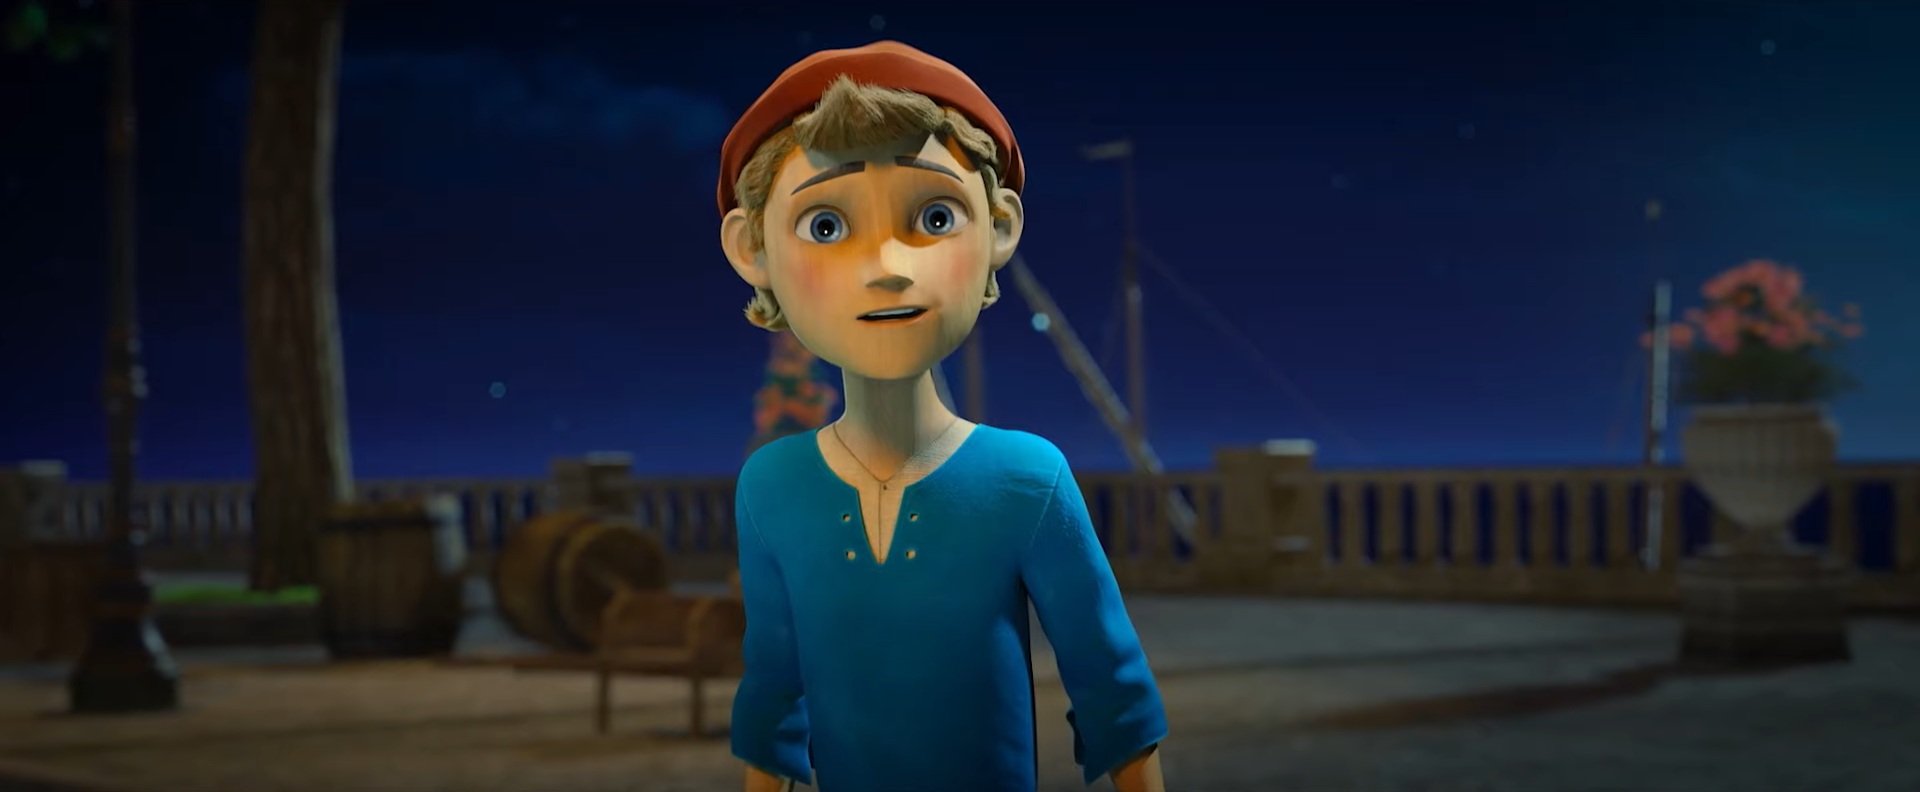 Trailer and Poster for Animated Film PINOCCHIO: A TRUE STORY Featuring  Pauly Shore as the Wooden Boy — GeekTyrant